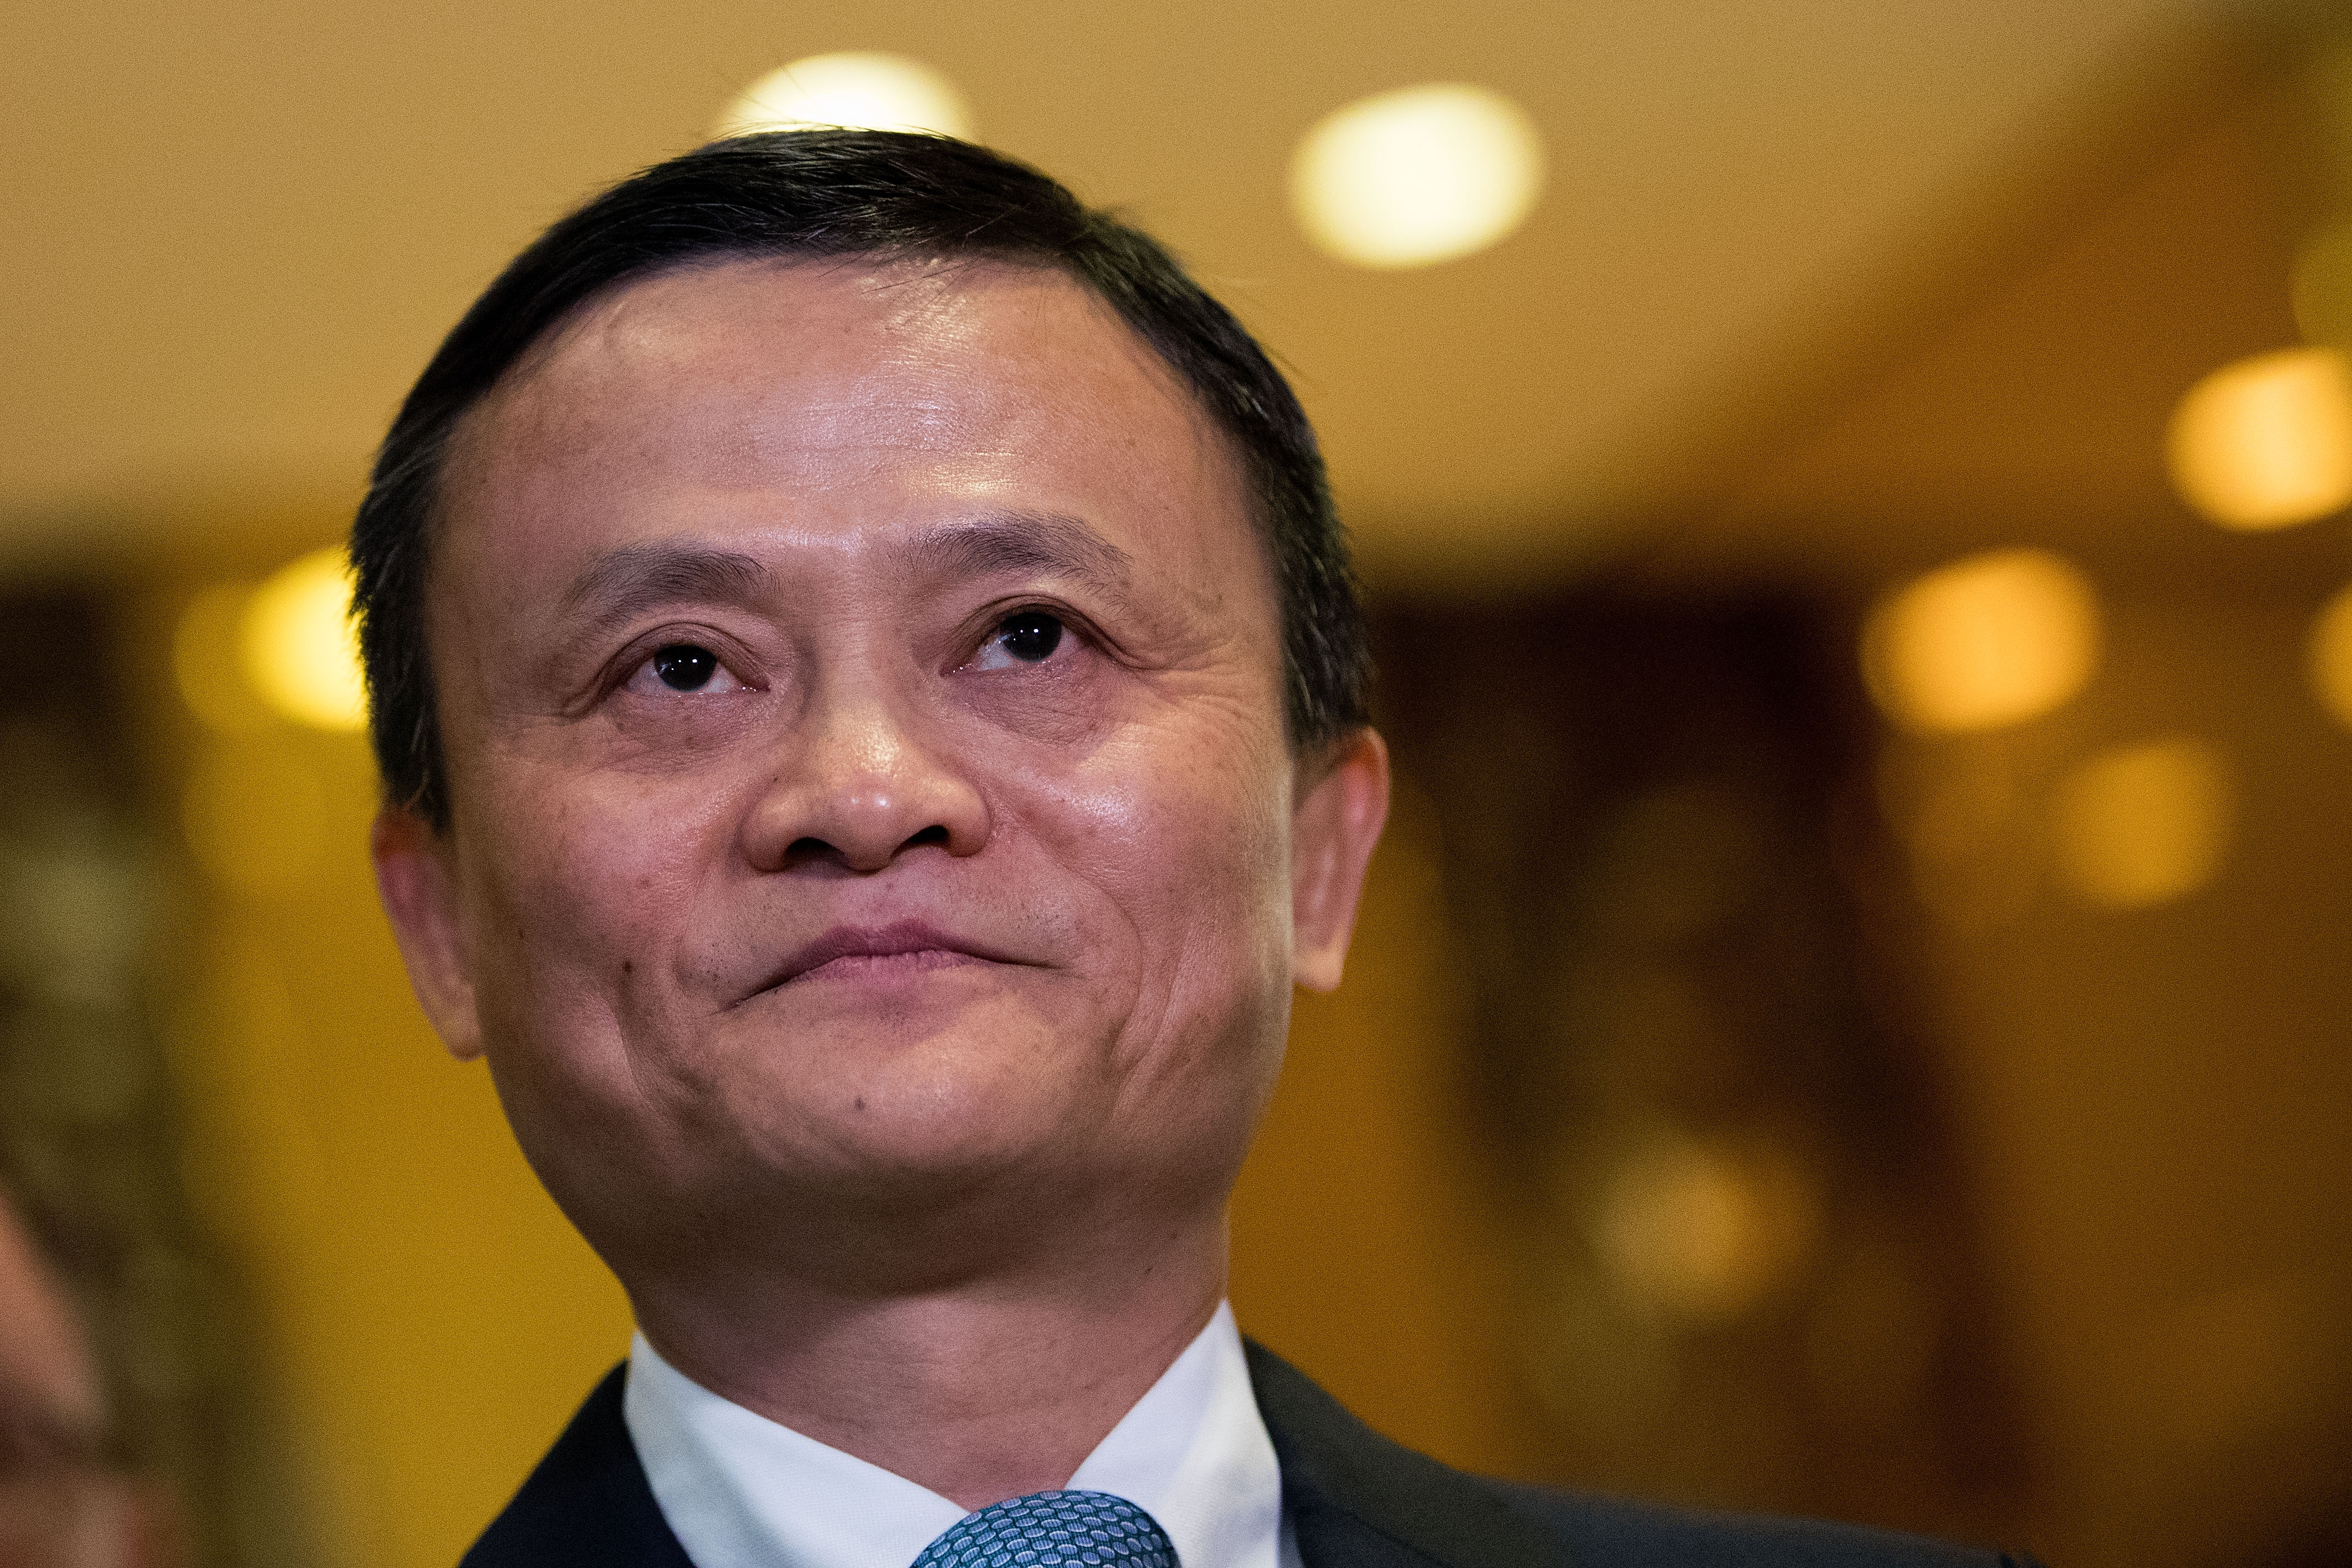 NEW YORK, NY - JANUARY 9: Jack Ma, Chairman of Alibaba Group, speaks with reporters following his meeting with President-elect Donald Trump at Trump Tower, January 9, 2017 in New York City. President-elect Donald Trump and his transition team are in the process of filling cabinet and other high level positions for the new administration.   Drew Angerer/Getty Images/AFP